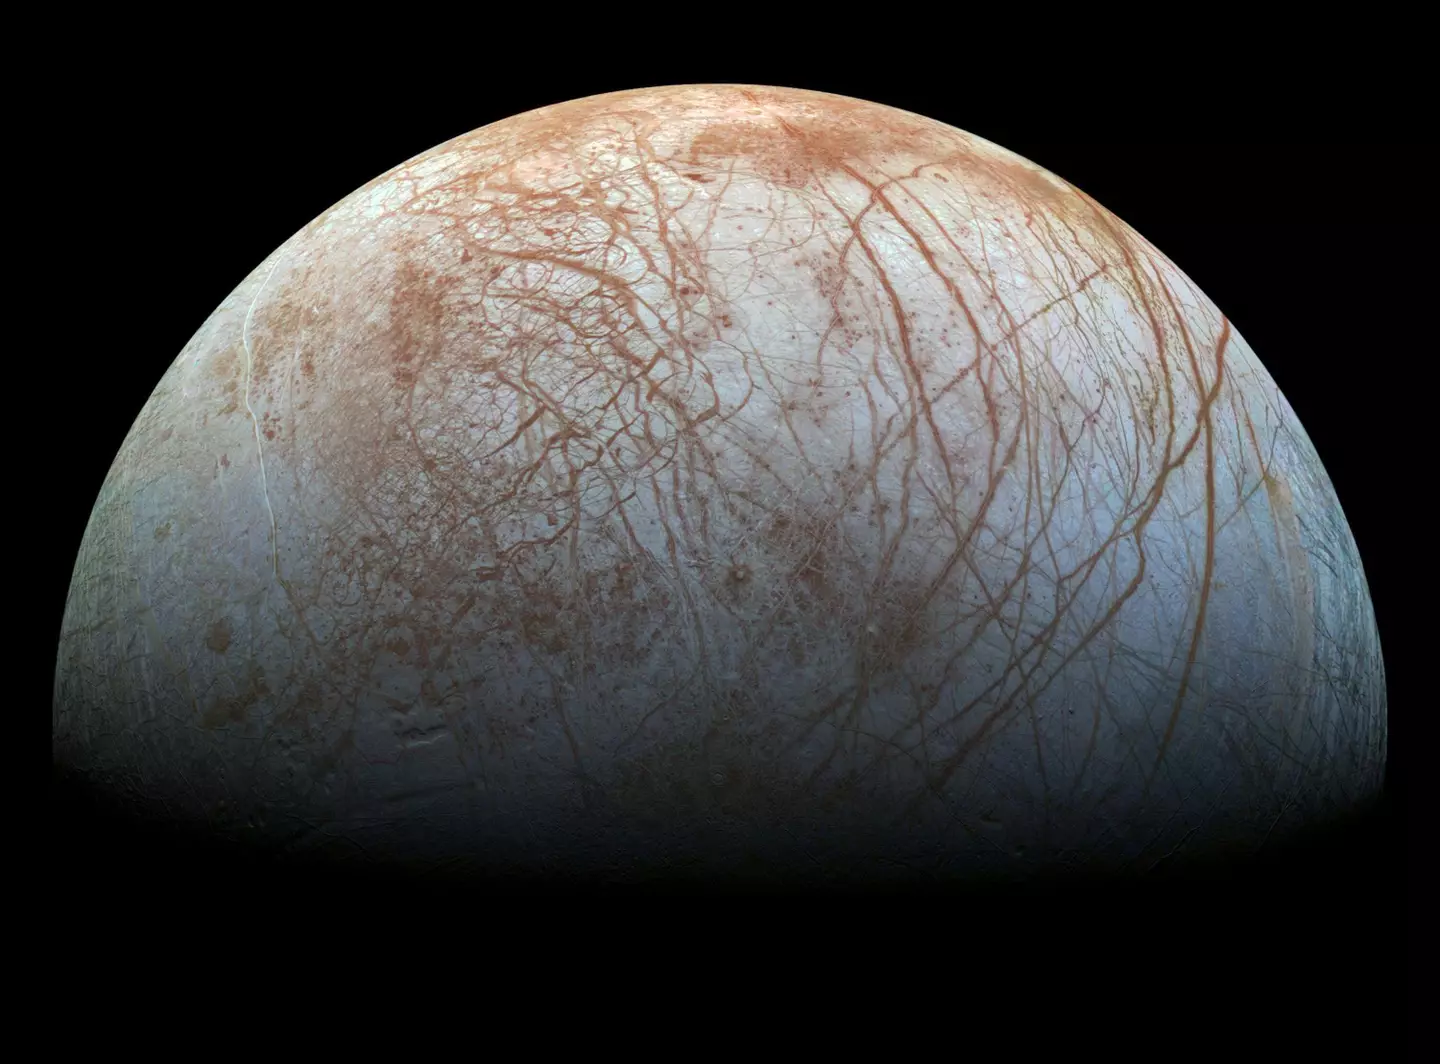 Europa, one of the moons of Jupiter, could hold the key to determining whether there's alien life out there.